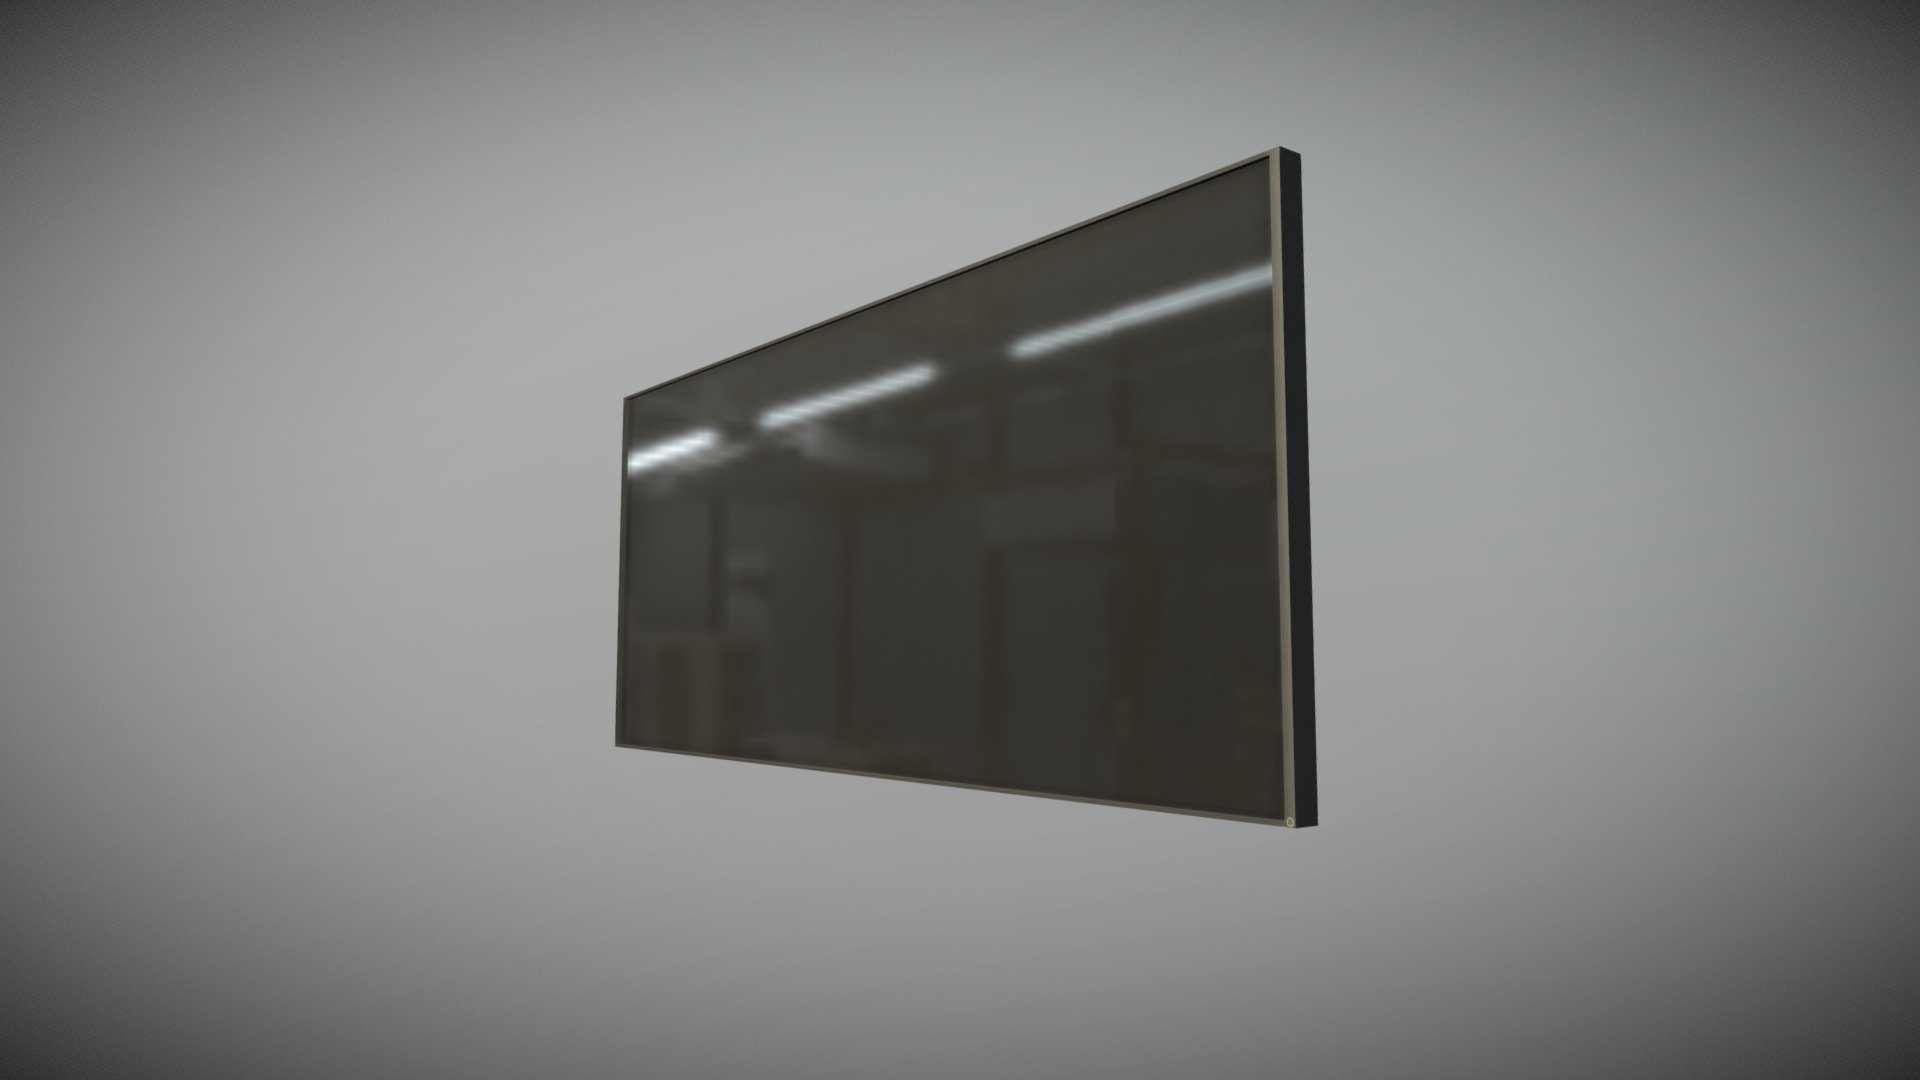 Flatscreen TV with - Black with Green Backlight - Download Free 3D ...